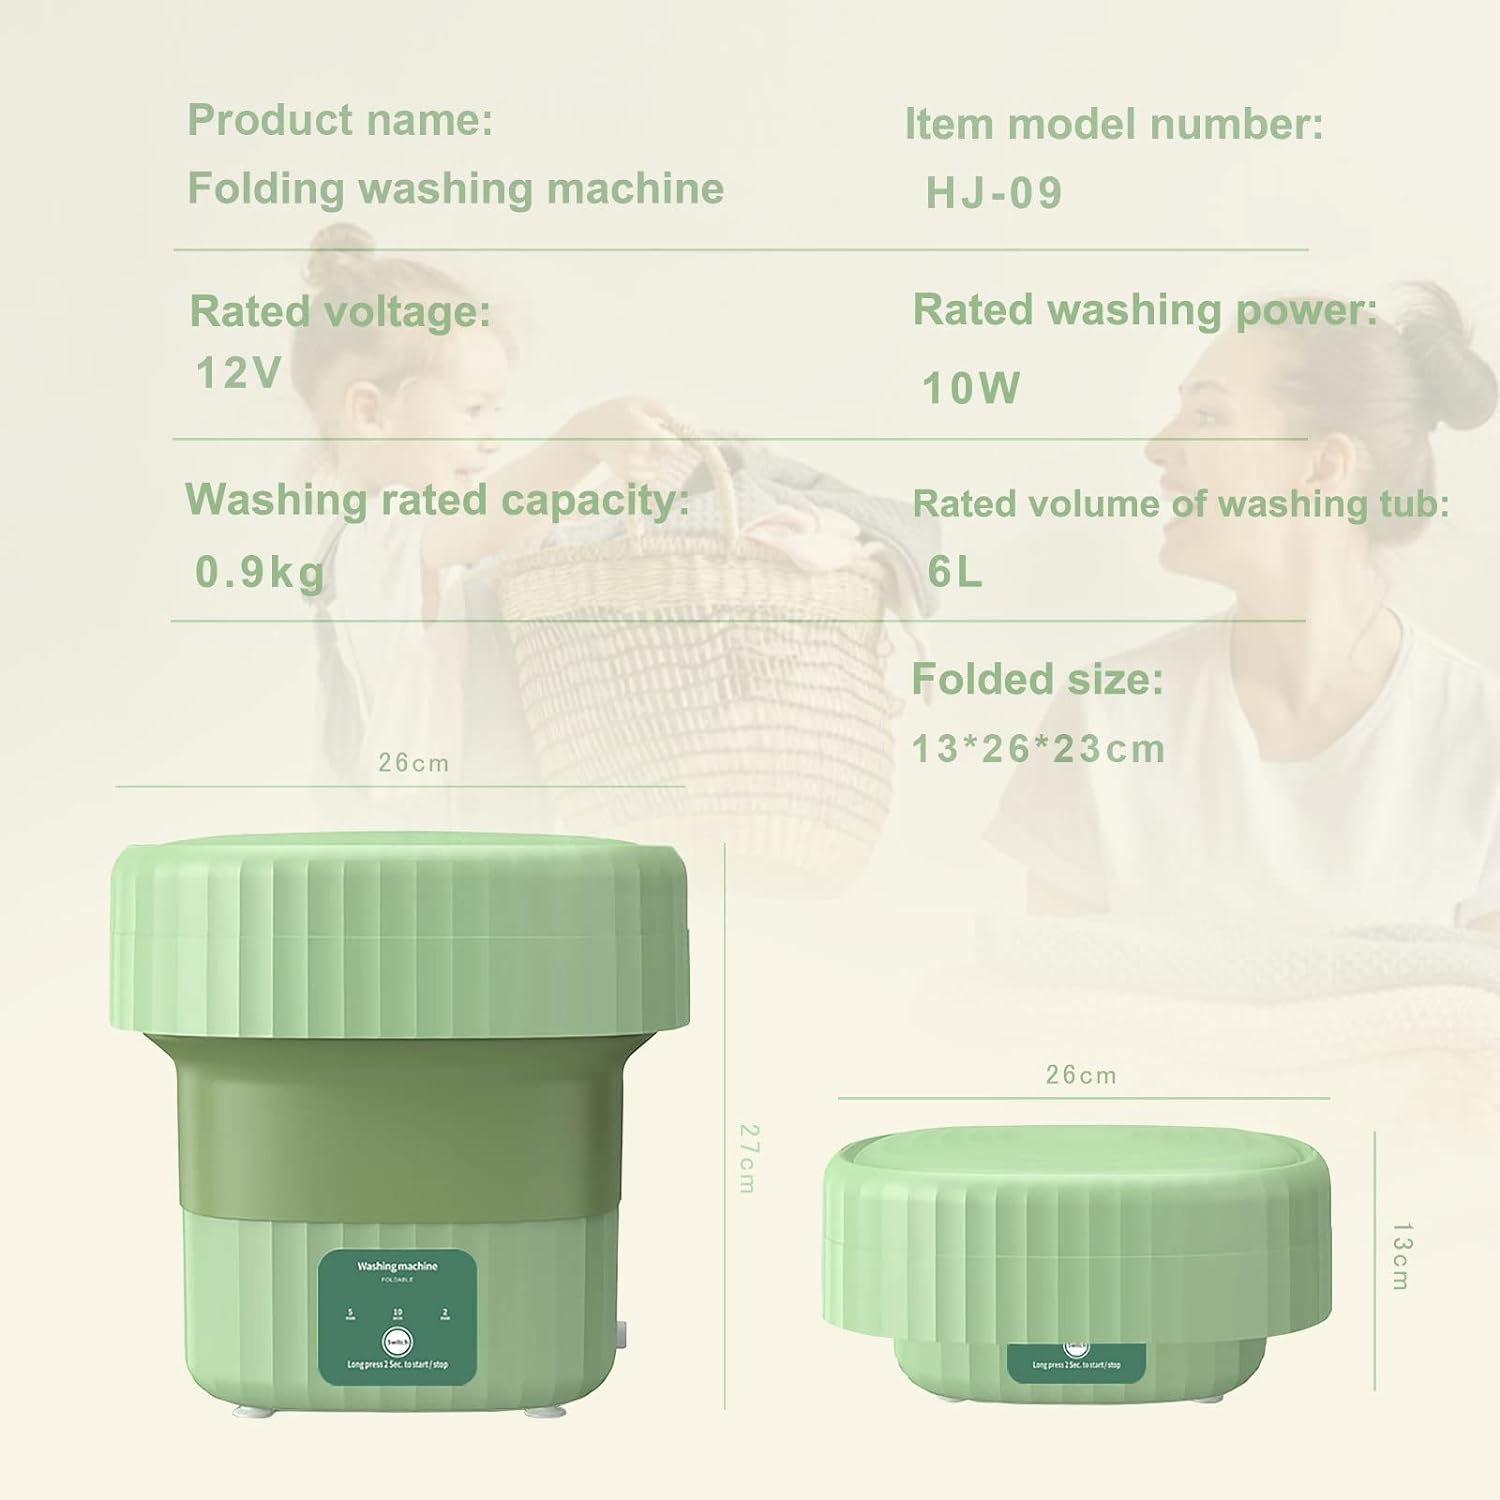 ZNOOOE,Portable washing Machine,Foldable Mini Washing Machine, Small Washer for Baby Clothes, Underwear or Small Items, Apartment, Dorm, Camping, RV Travel laundry- Gift Choice, Green